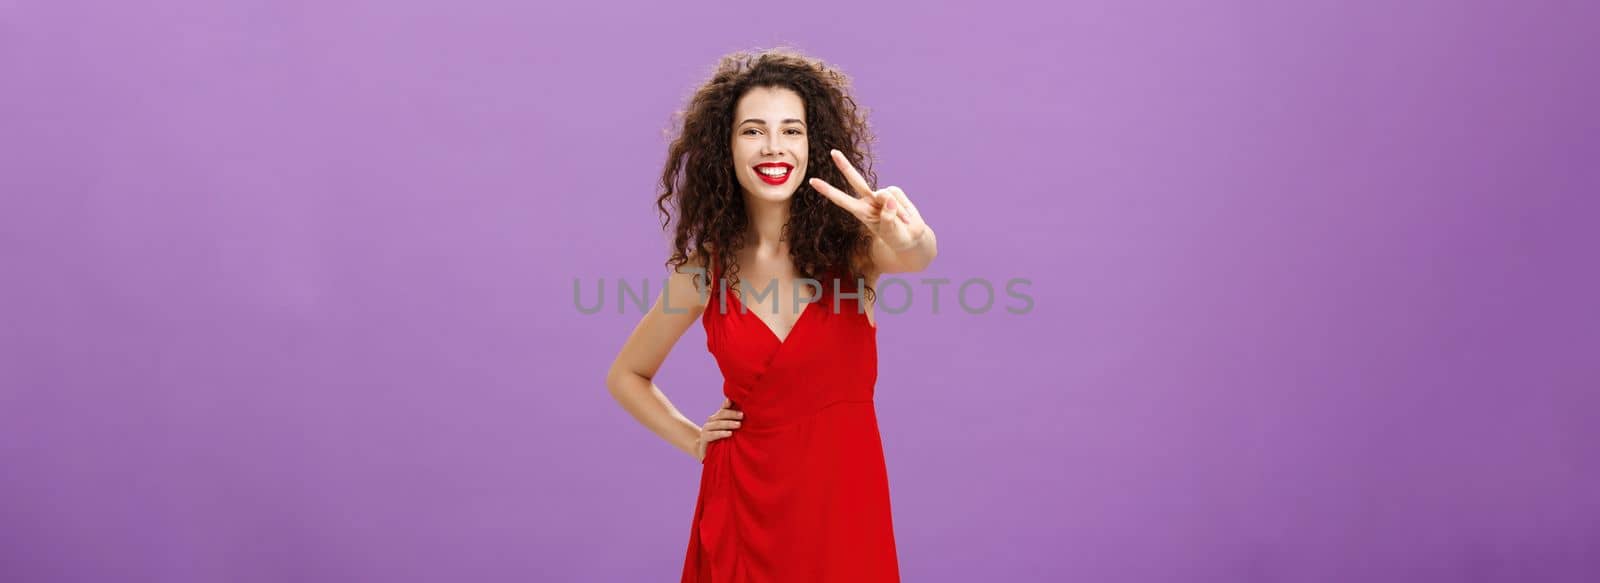 Studio shot of friendly gorgeous and stylish young european woman with cute curly hairstyle red lipstick and dress showing peace gesture at camera and smiling broadly over purple background. Emotions concept